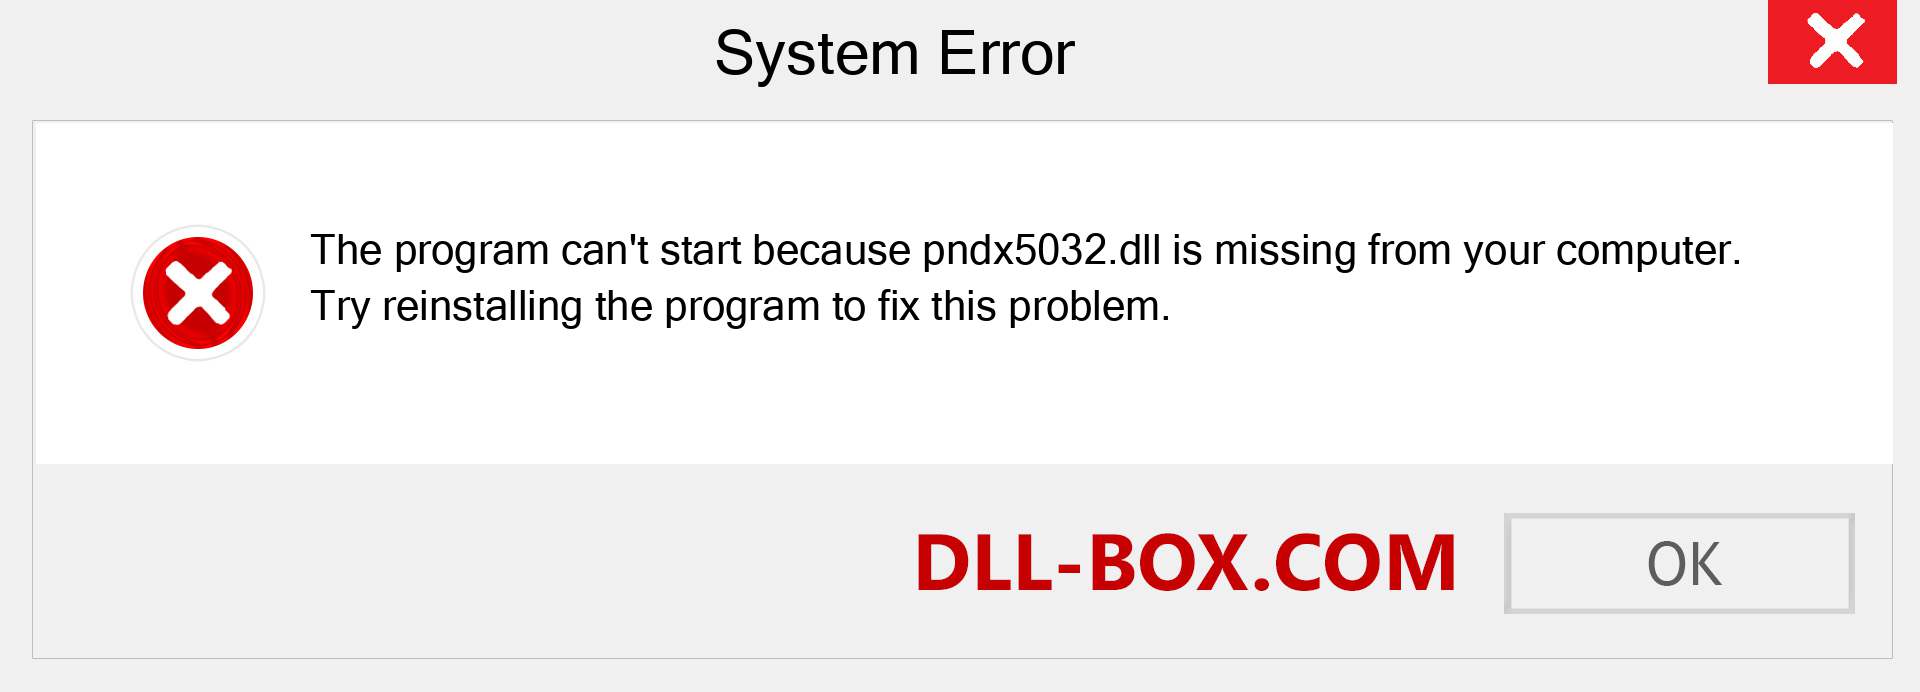  pndx5032.dll file is missing?. Download for Windows 7, 8, 10 - Fix  pndx5032 dll Missing Error on Windows, photos, images